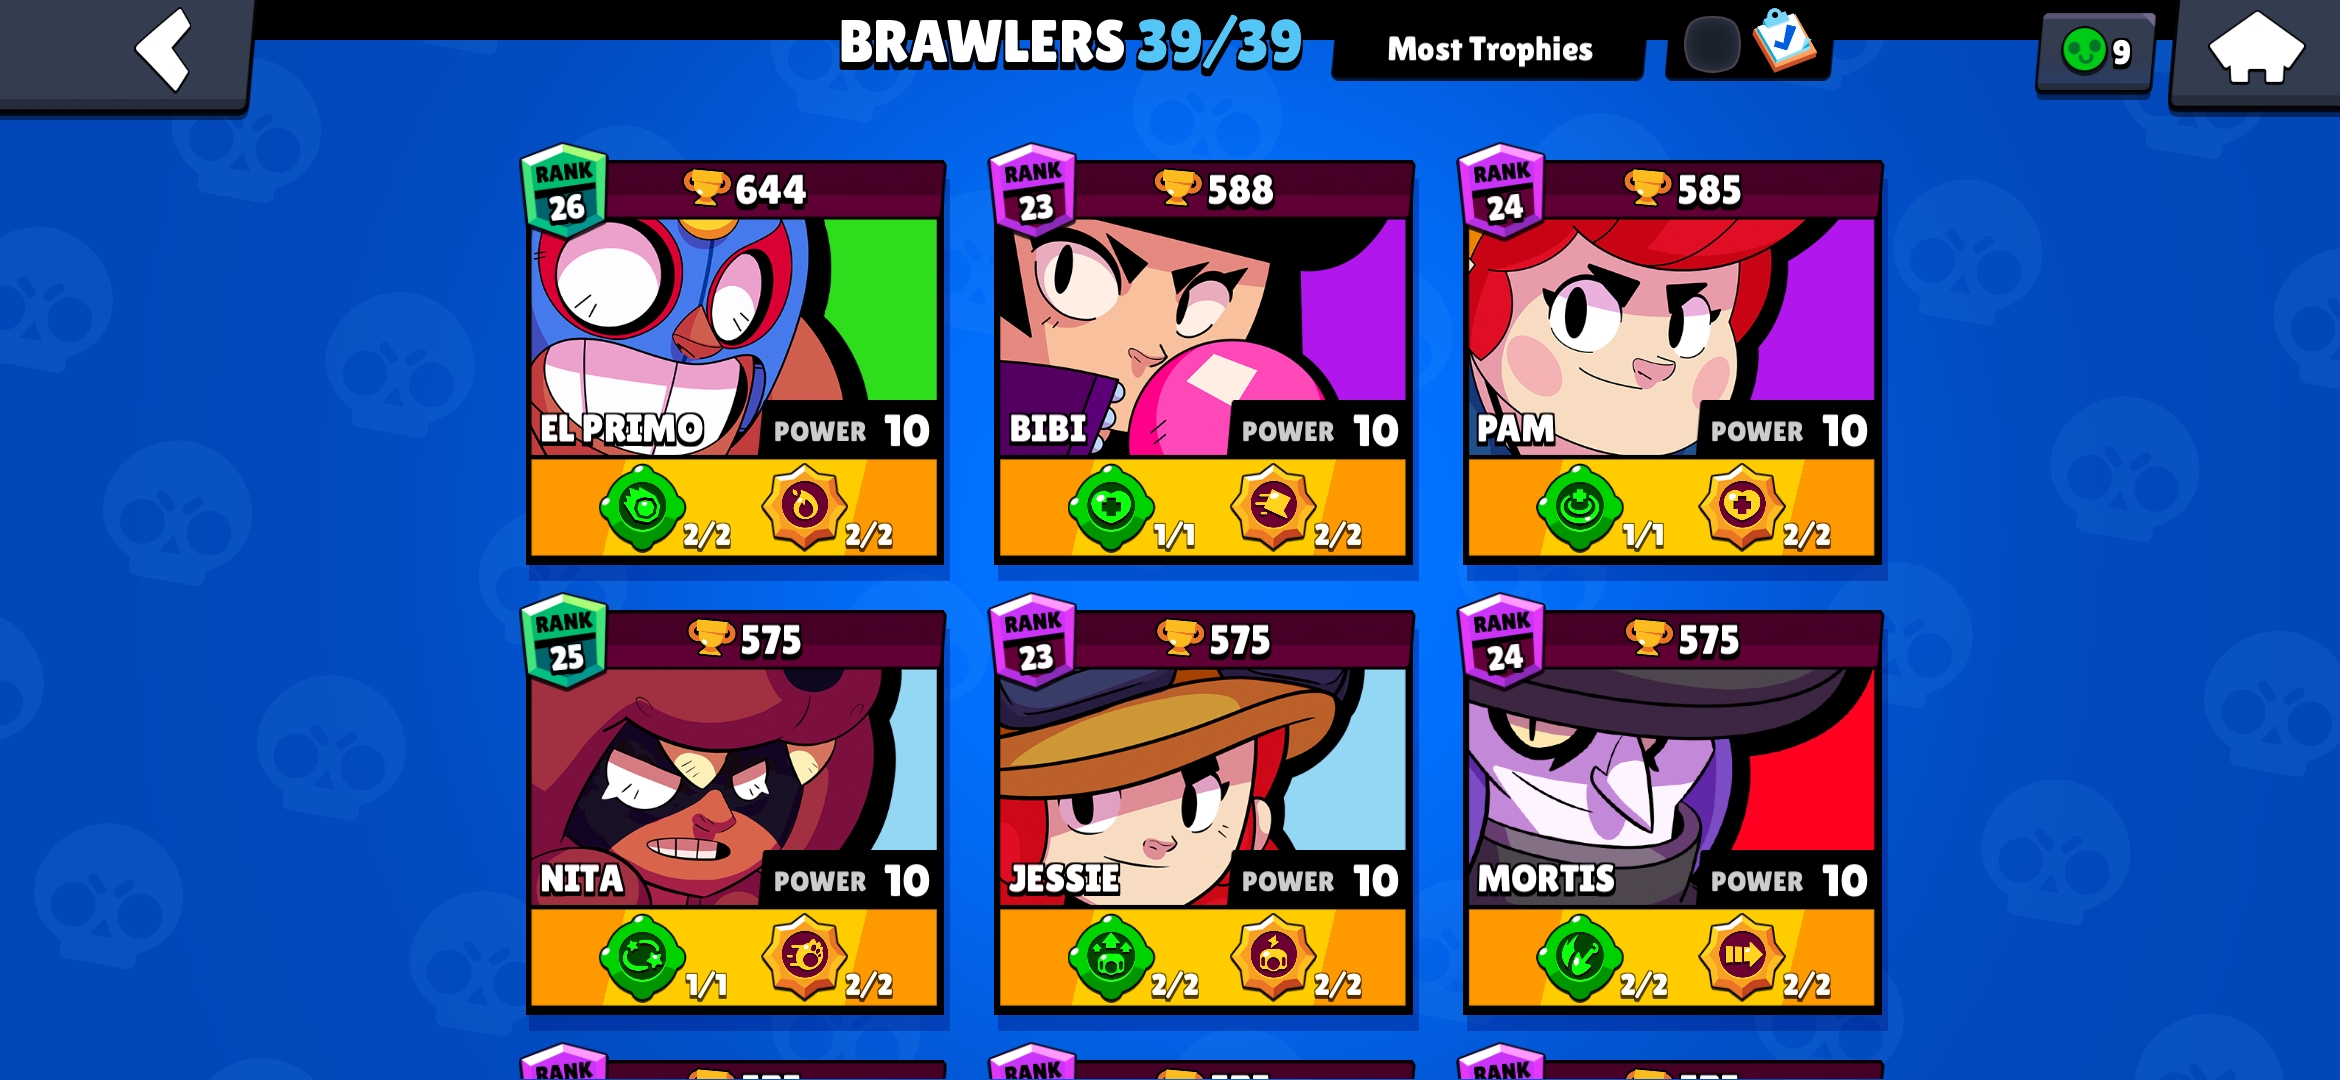 Selling Brawl Star Max Account In Cheap Epicnpc Marketplace 